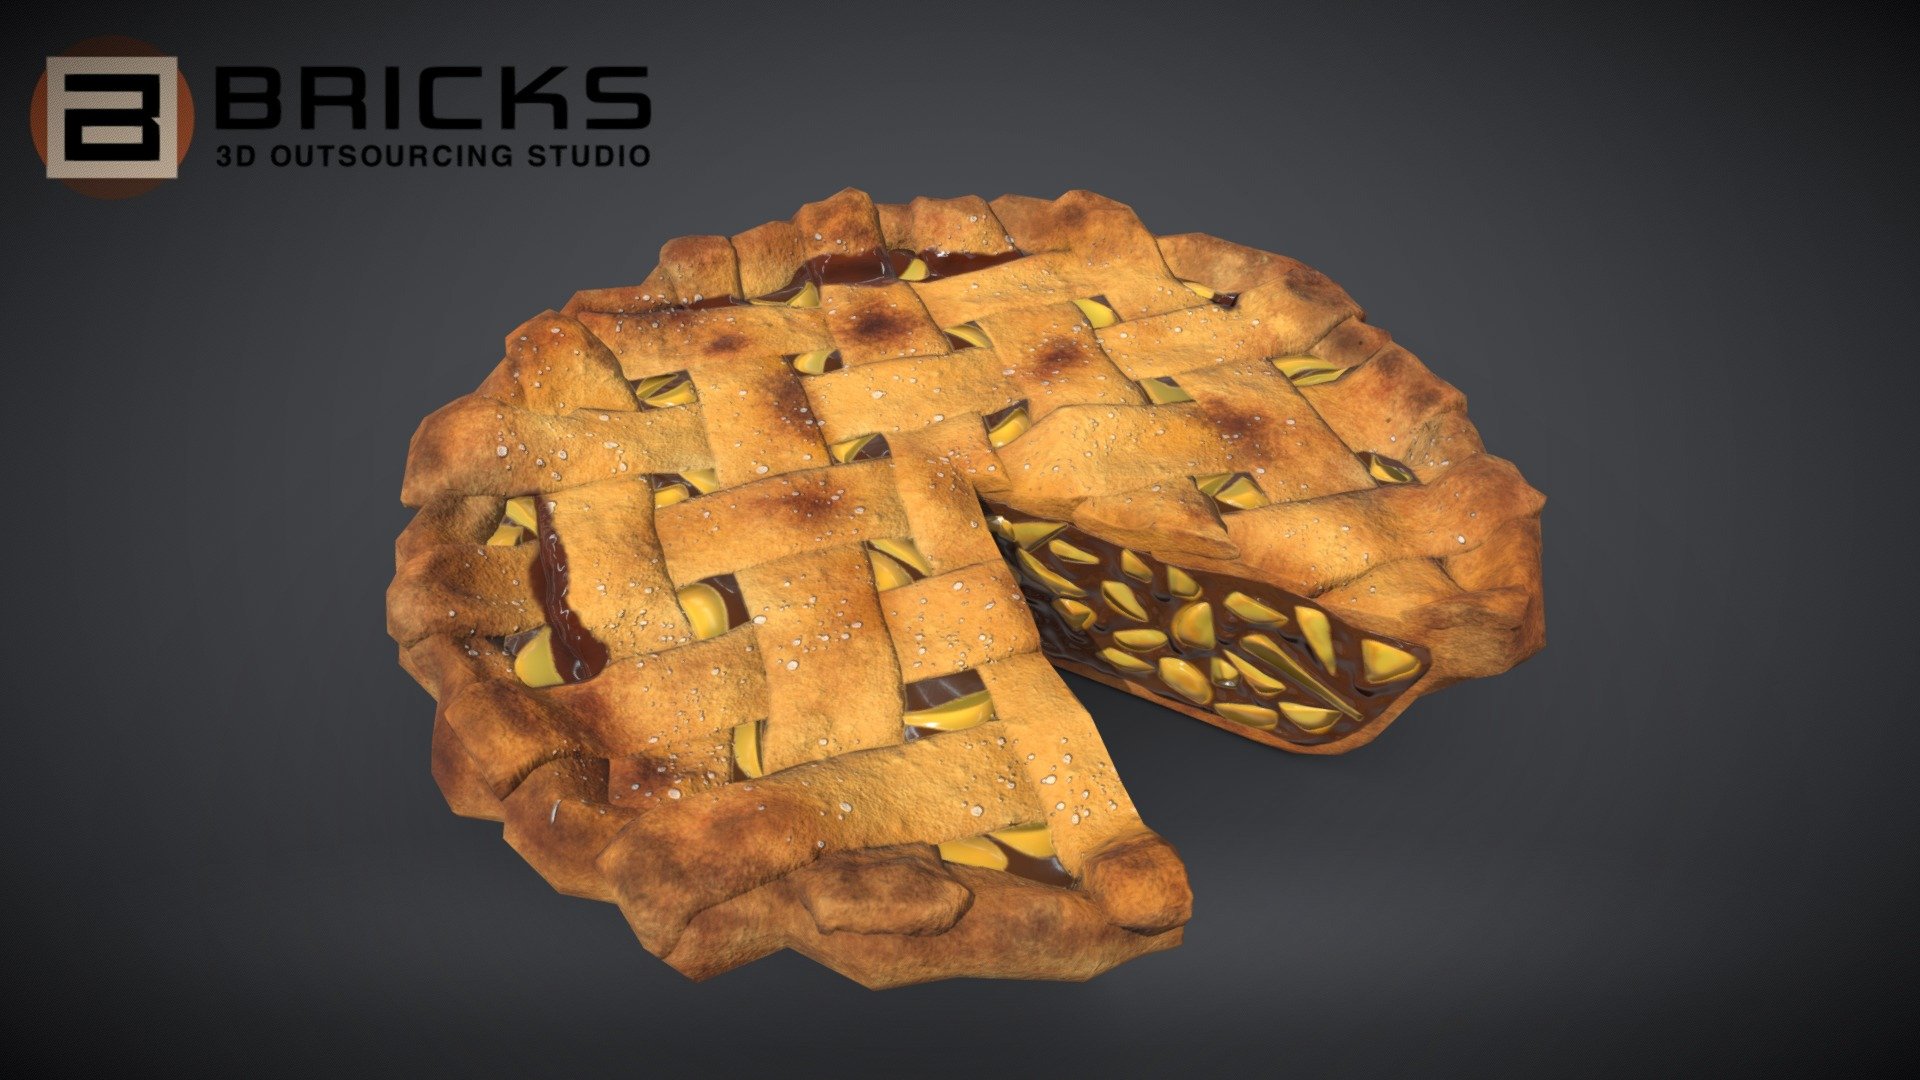 PBR Food Asset:
PeachPie Chart
Polycount: 1542
Vertex count: 773
Texture Size: 2048px x 2048px
Normal: OpenGL

If you need any adjust in file please contact us: team@bricks3dstudio.com

Hire us: tringuyen@bricks3dstudio.com
Here is us: https://www.bricks3dstudio.com/
        https://www.artstation.com/bricksstudio
        https://www.facebook.com/Bricks3dstudio/
        https://www.linkedin.com/in/bricks-studio-b10462252/ - PeachPie Chart - Buy Royalty Free 3D model by Bricks Studio (@bricks3dstudio) 3d model